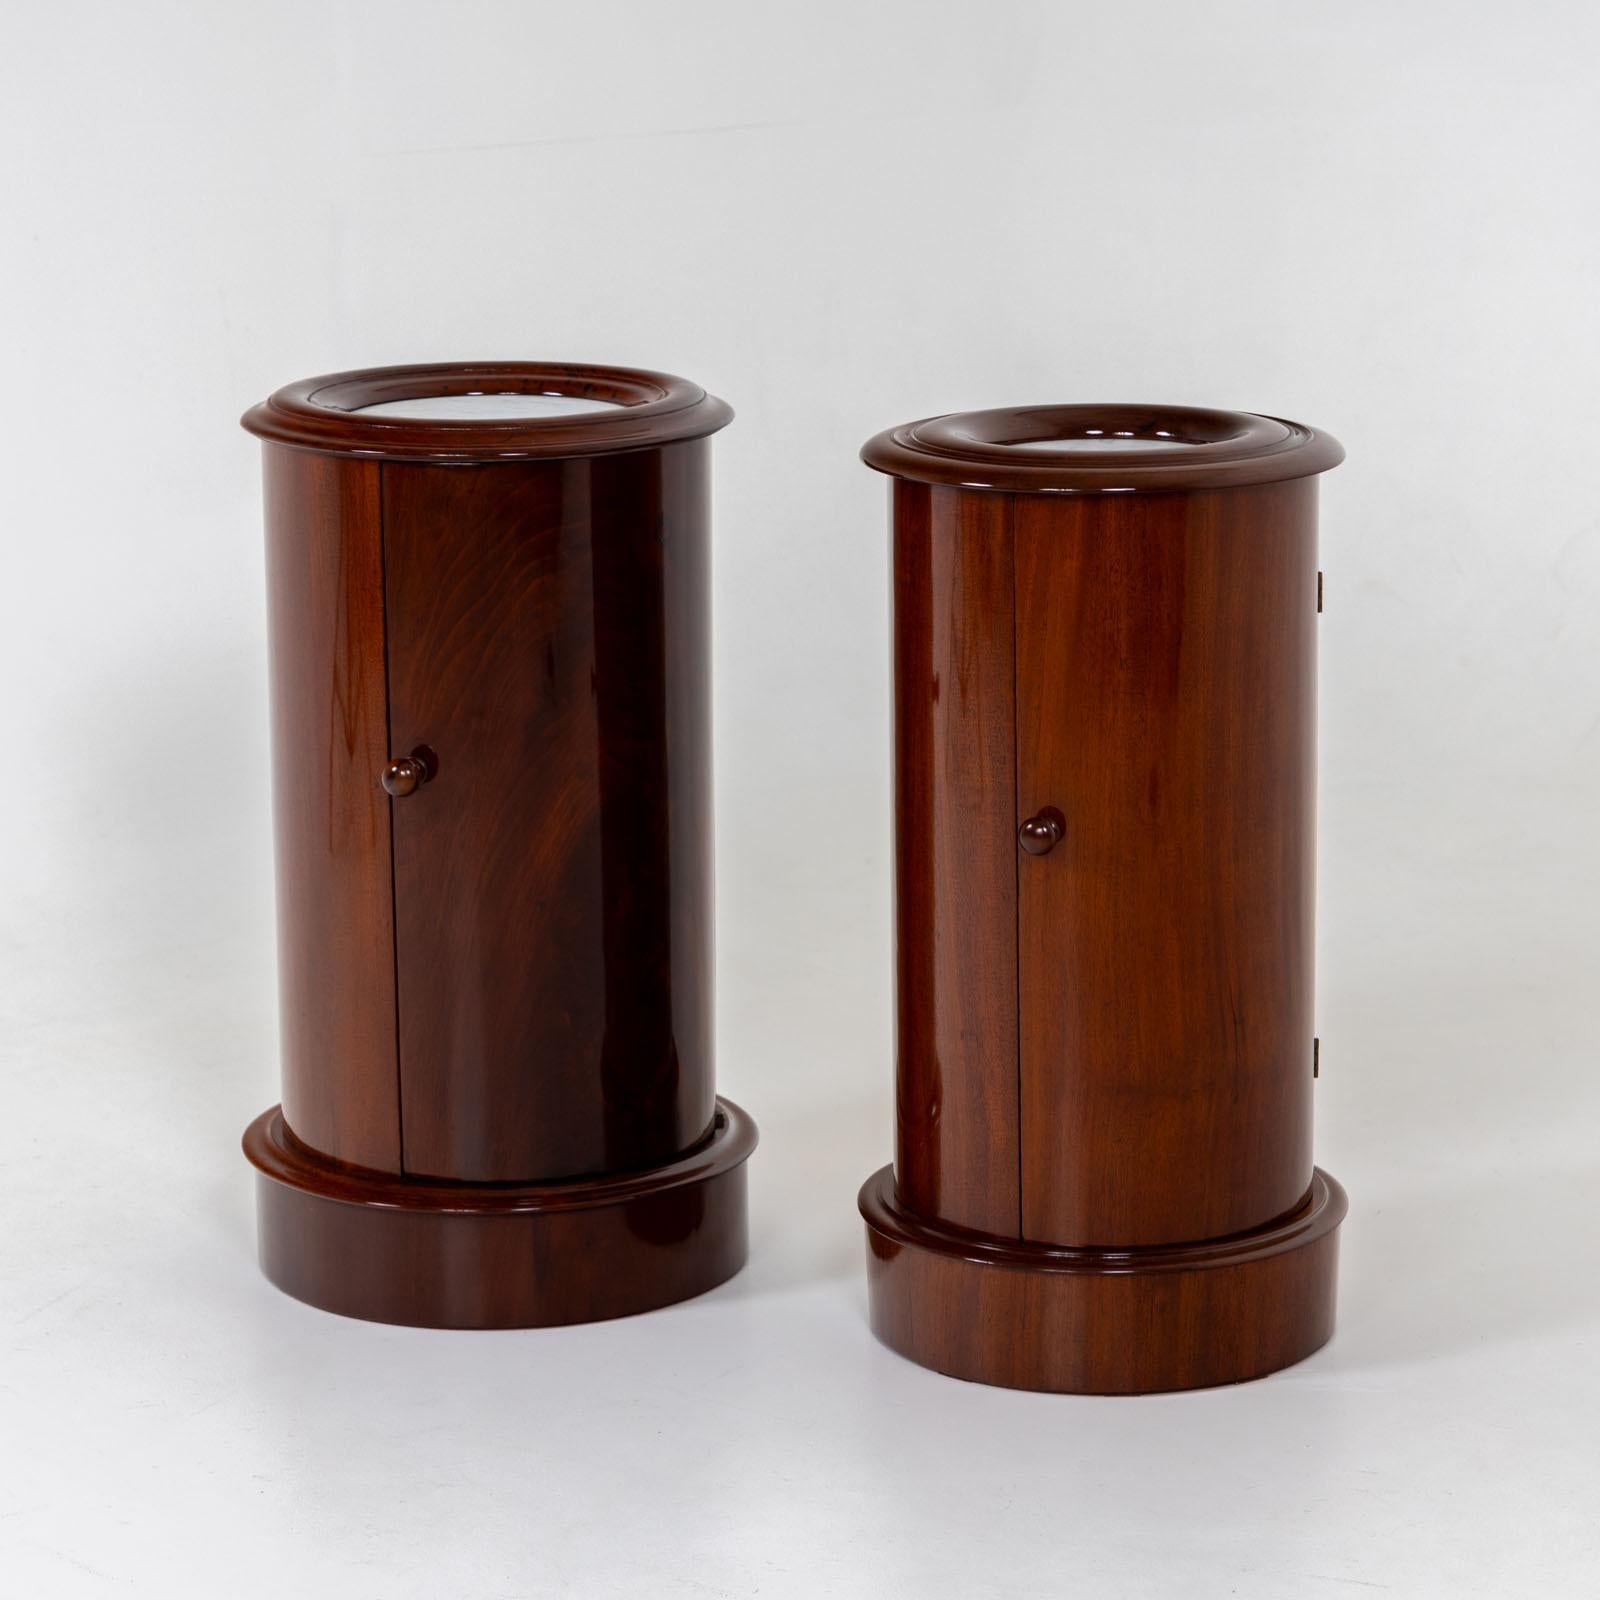 Two Biedermeier Drum Cabinets, around 1820 In Good Condition For Sale In Greding, DE